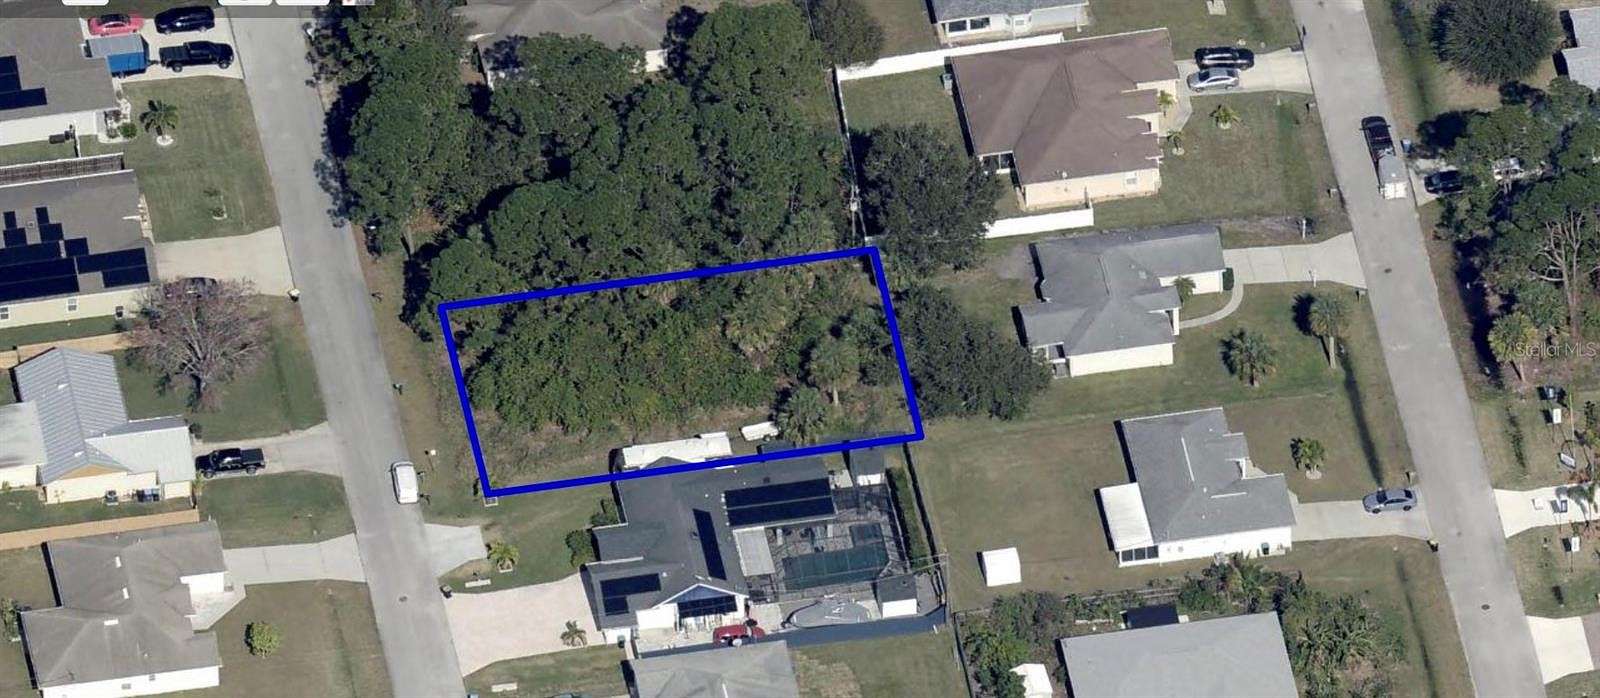 0.24 Acres of Residential Land for Sale in Palm Bay, Florida